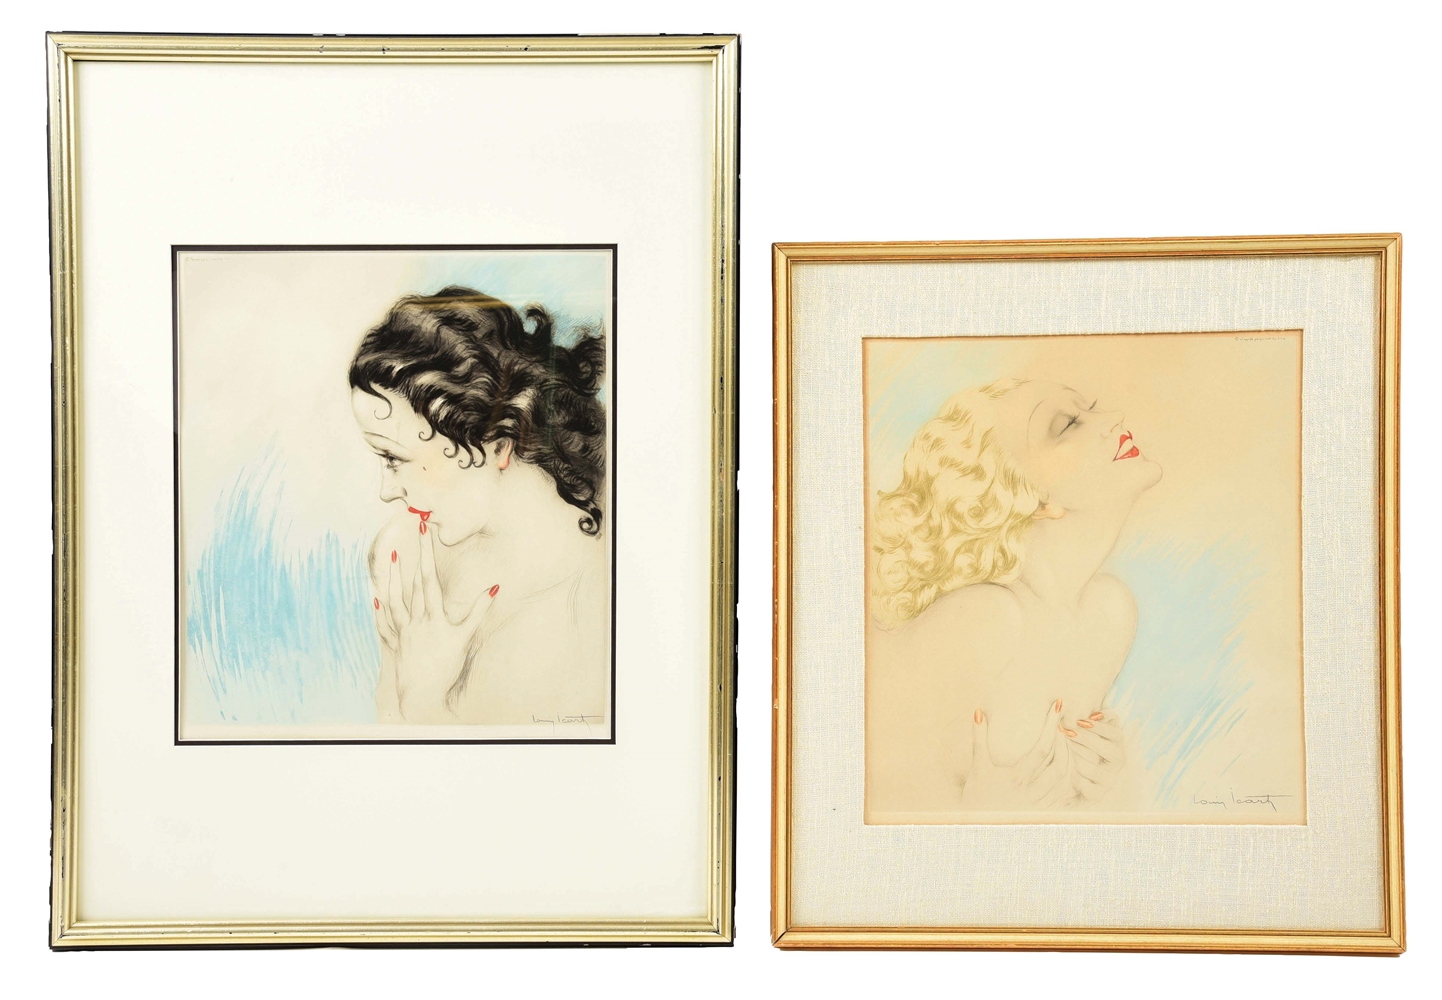 LOT OF 2: LOUIS ICART (FRENCH, 1888 - 1950) "VOLUPTÉ" & "CANDEUR".